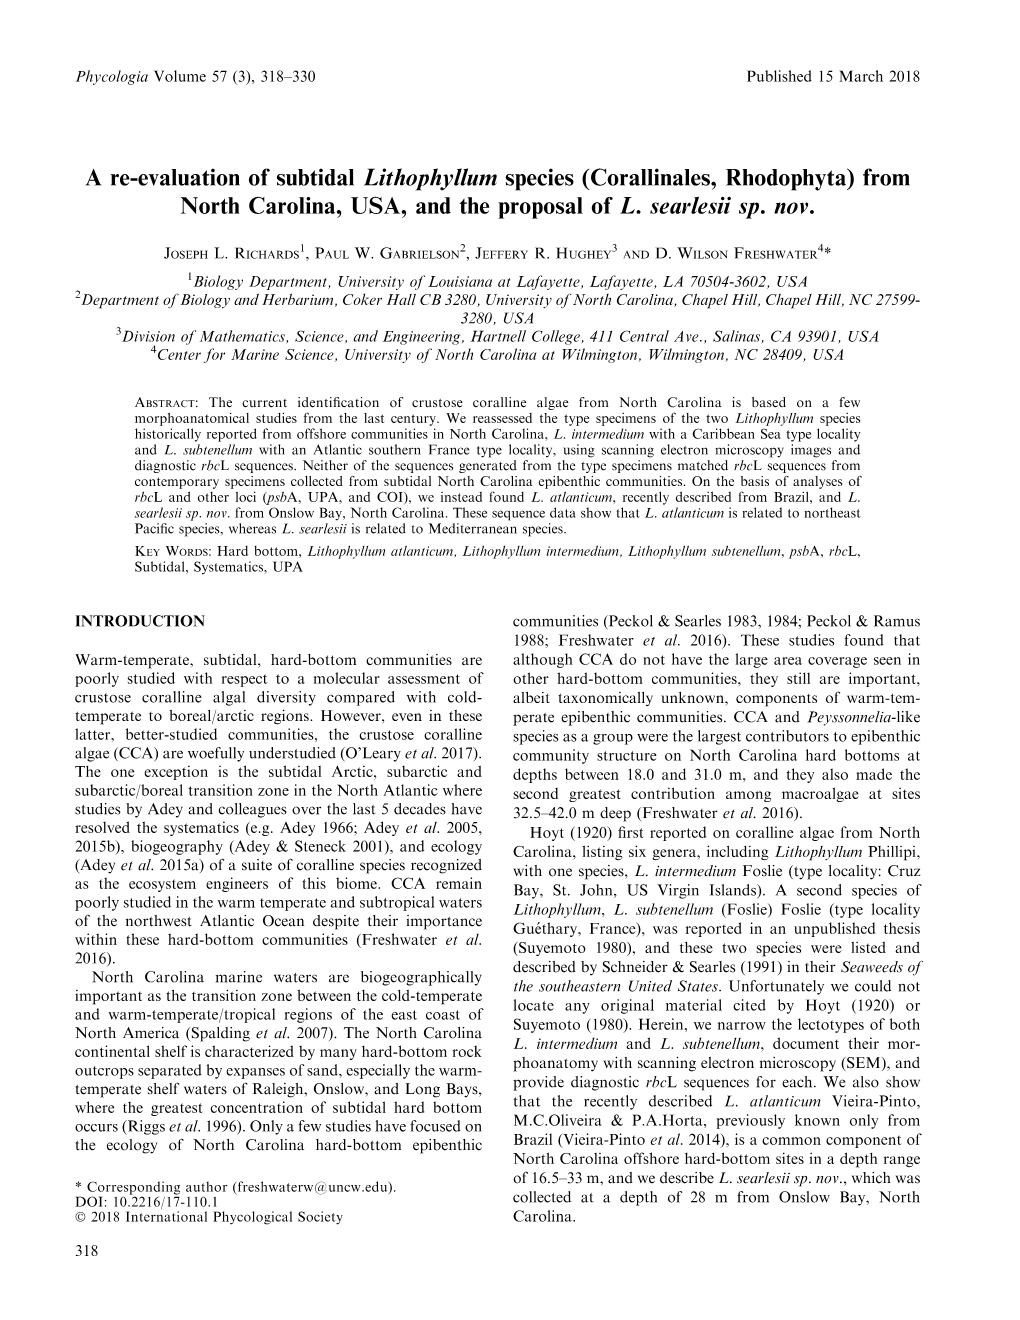 A Re-Evaluation of Subtidal Lithophyllum Species (Corallinales, Rhodophyta) from North Carolina, USA, and the Proposal of L